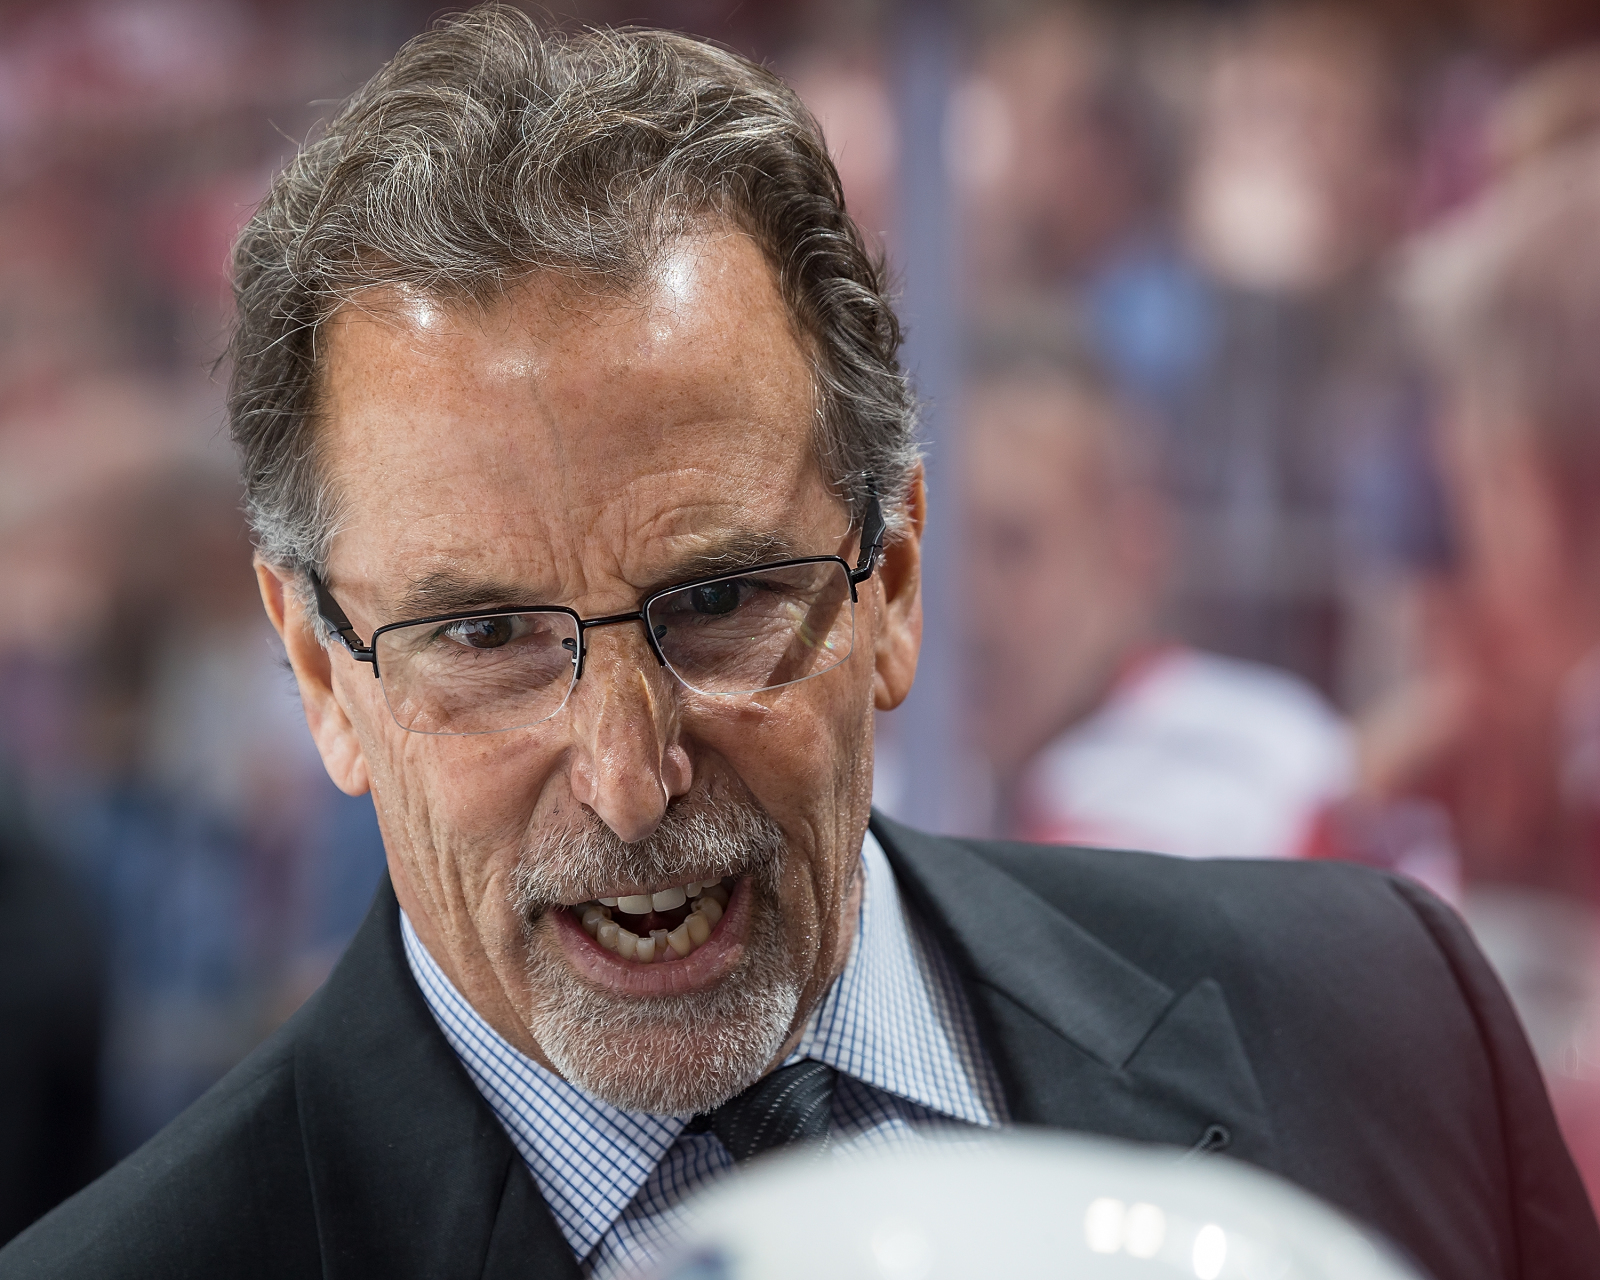 Blue Jackets Still Seeking Consistency Offensively and Defensively,  According to John Tortorella